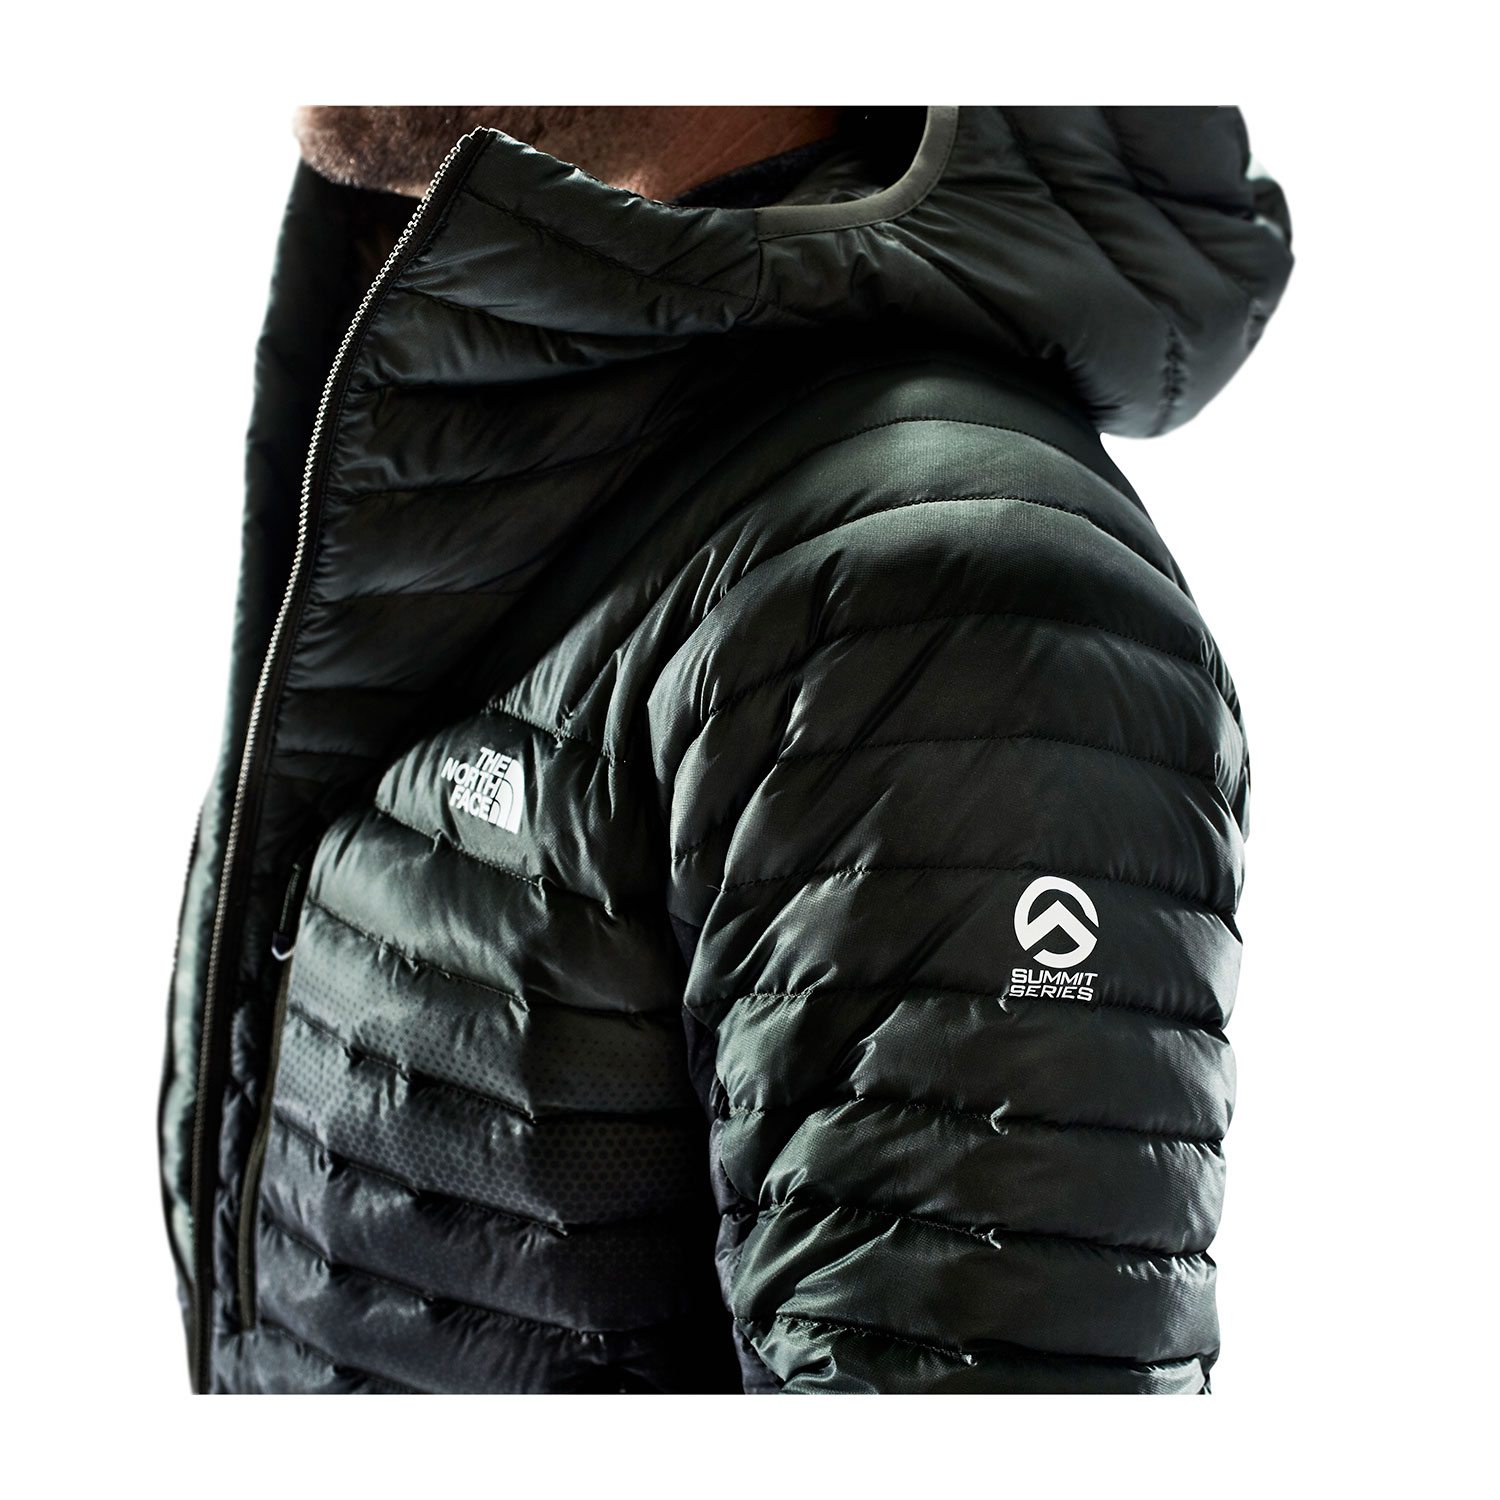 The north face summit series